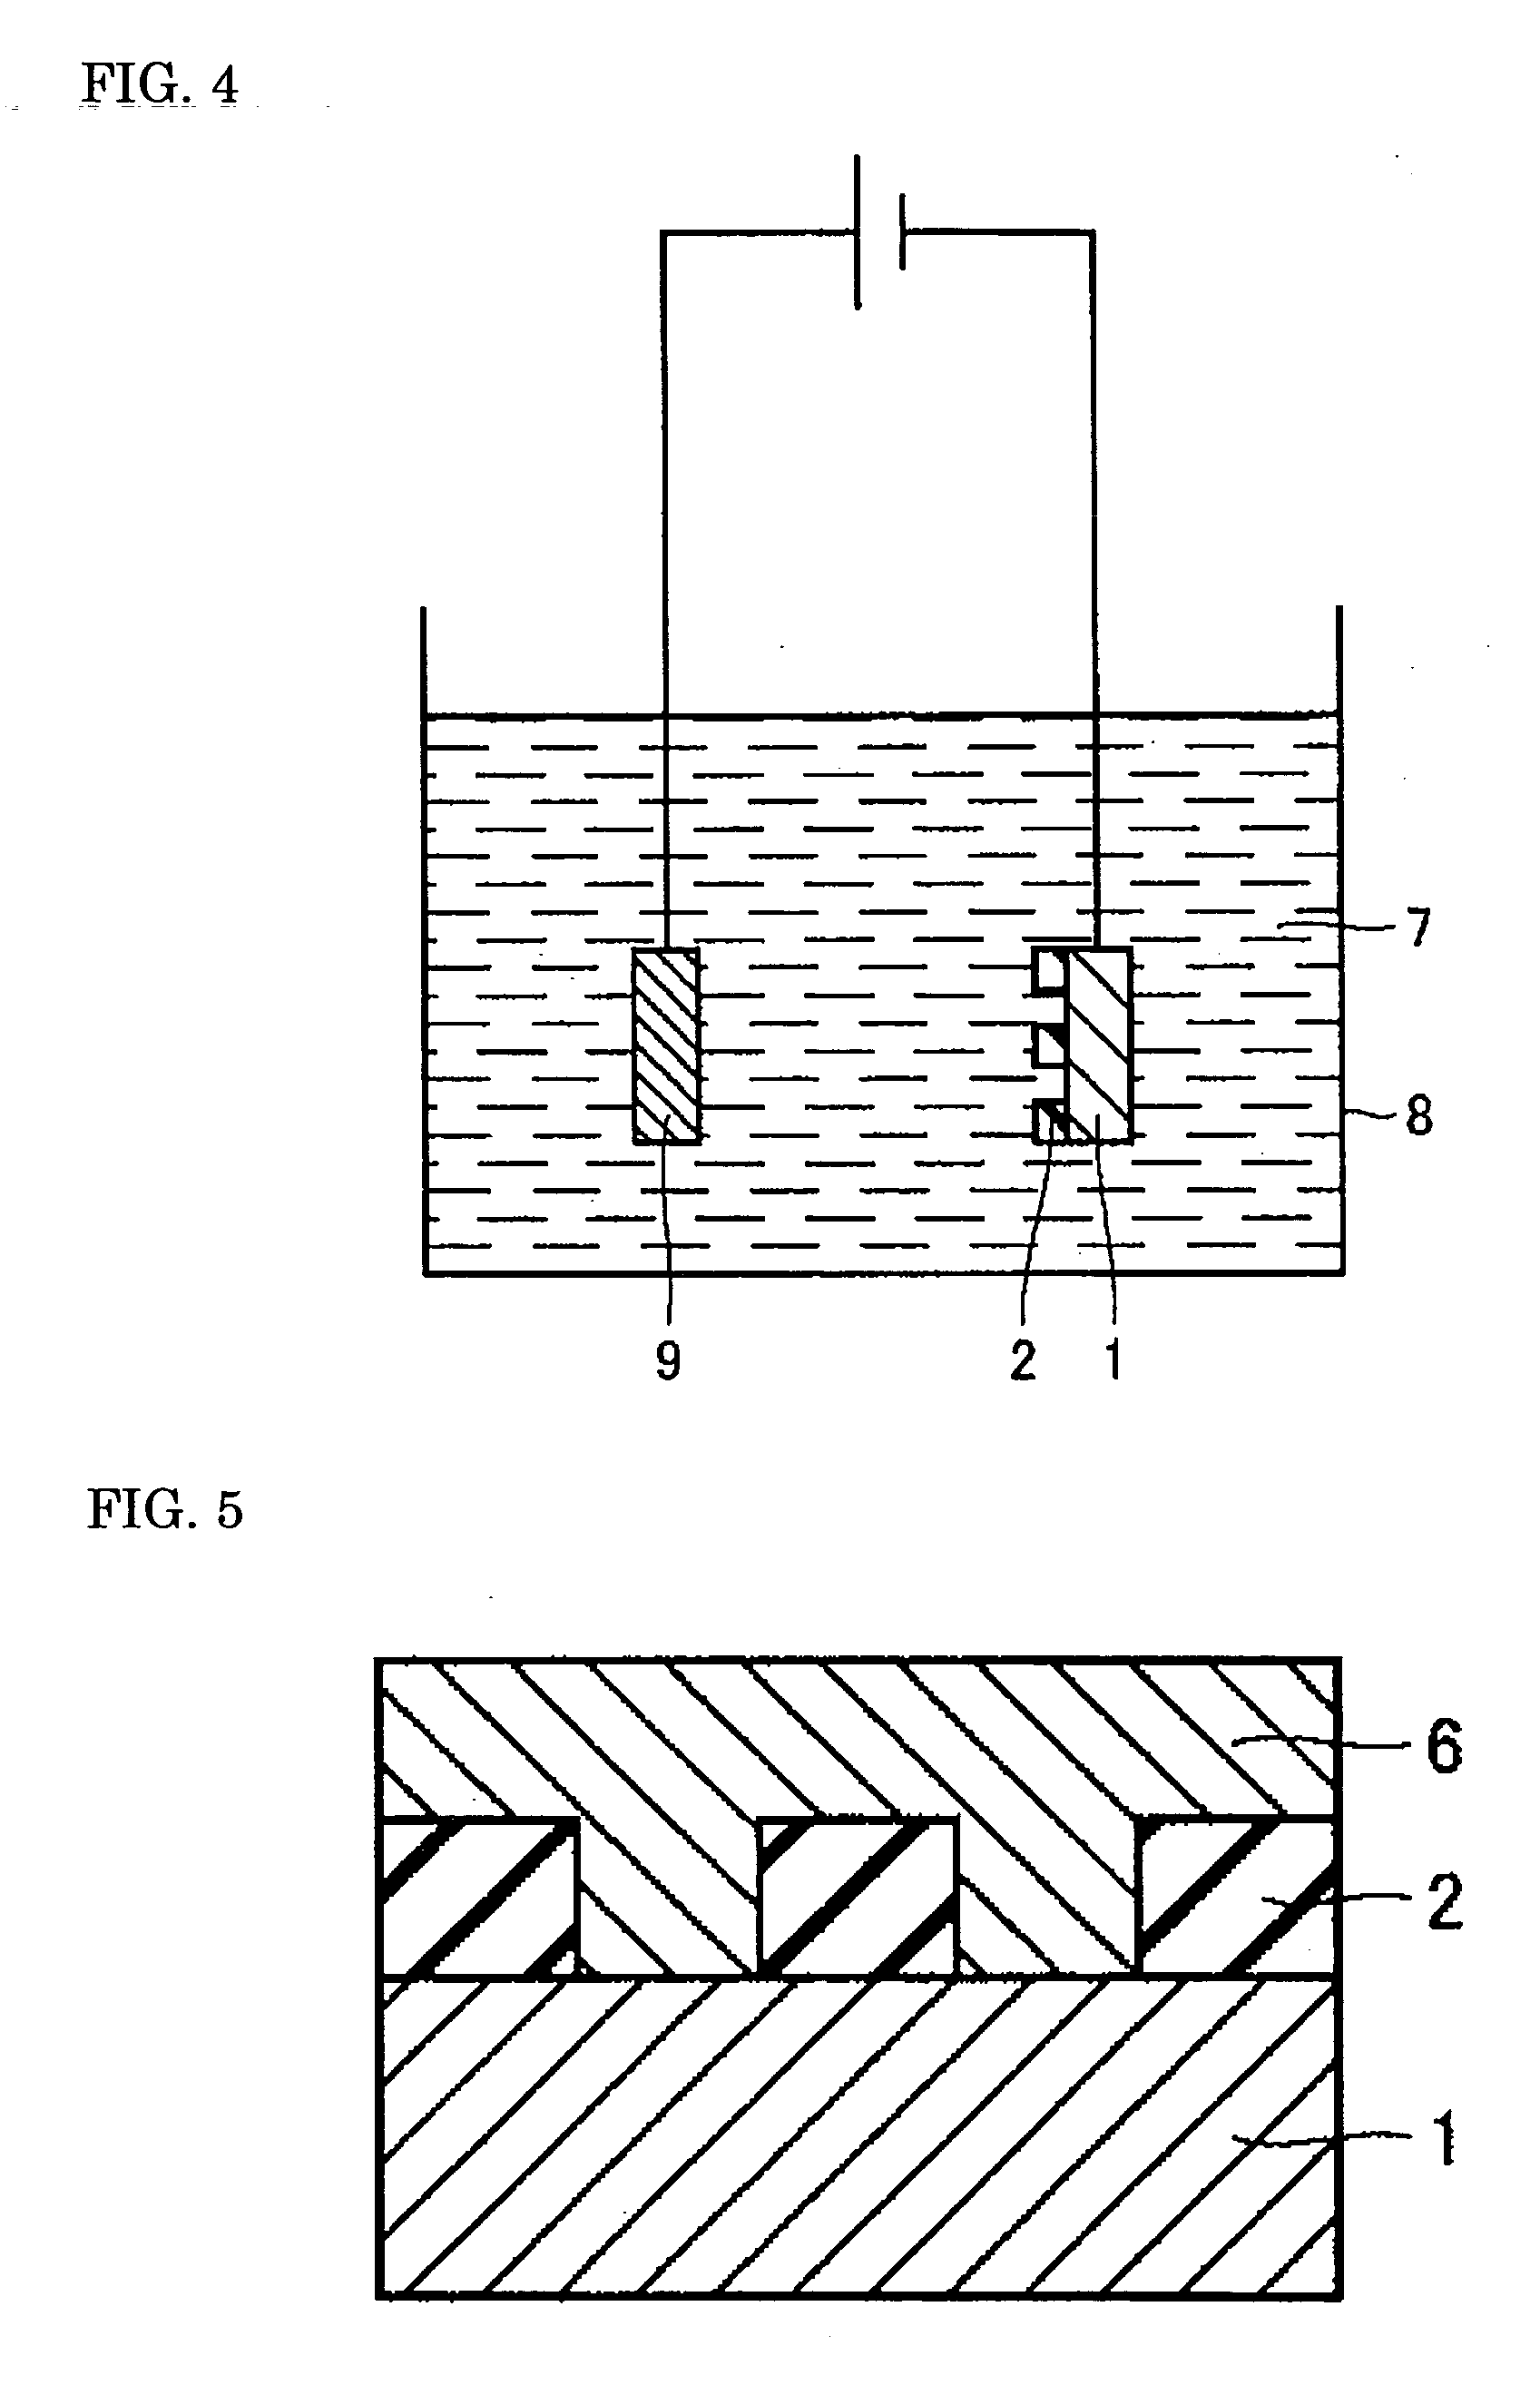 Method of manufacturing electrical parts